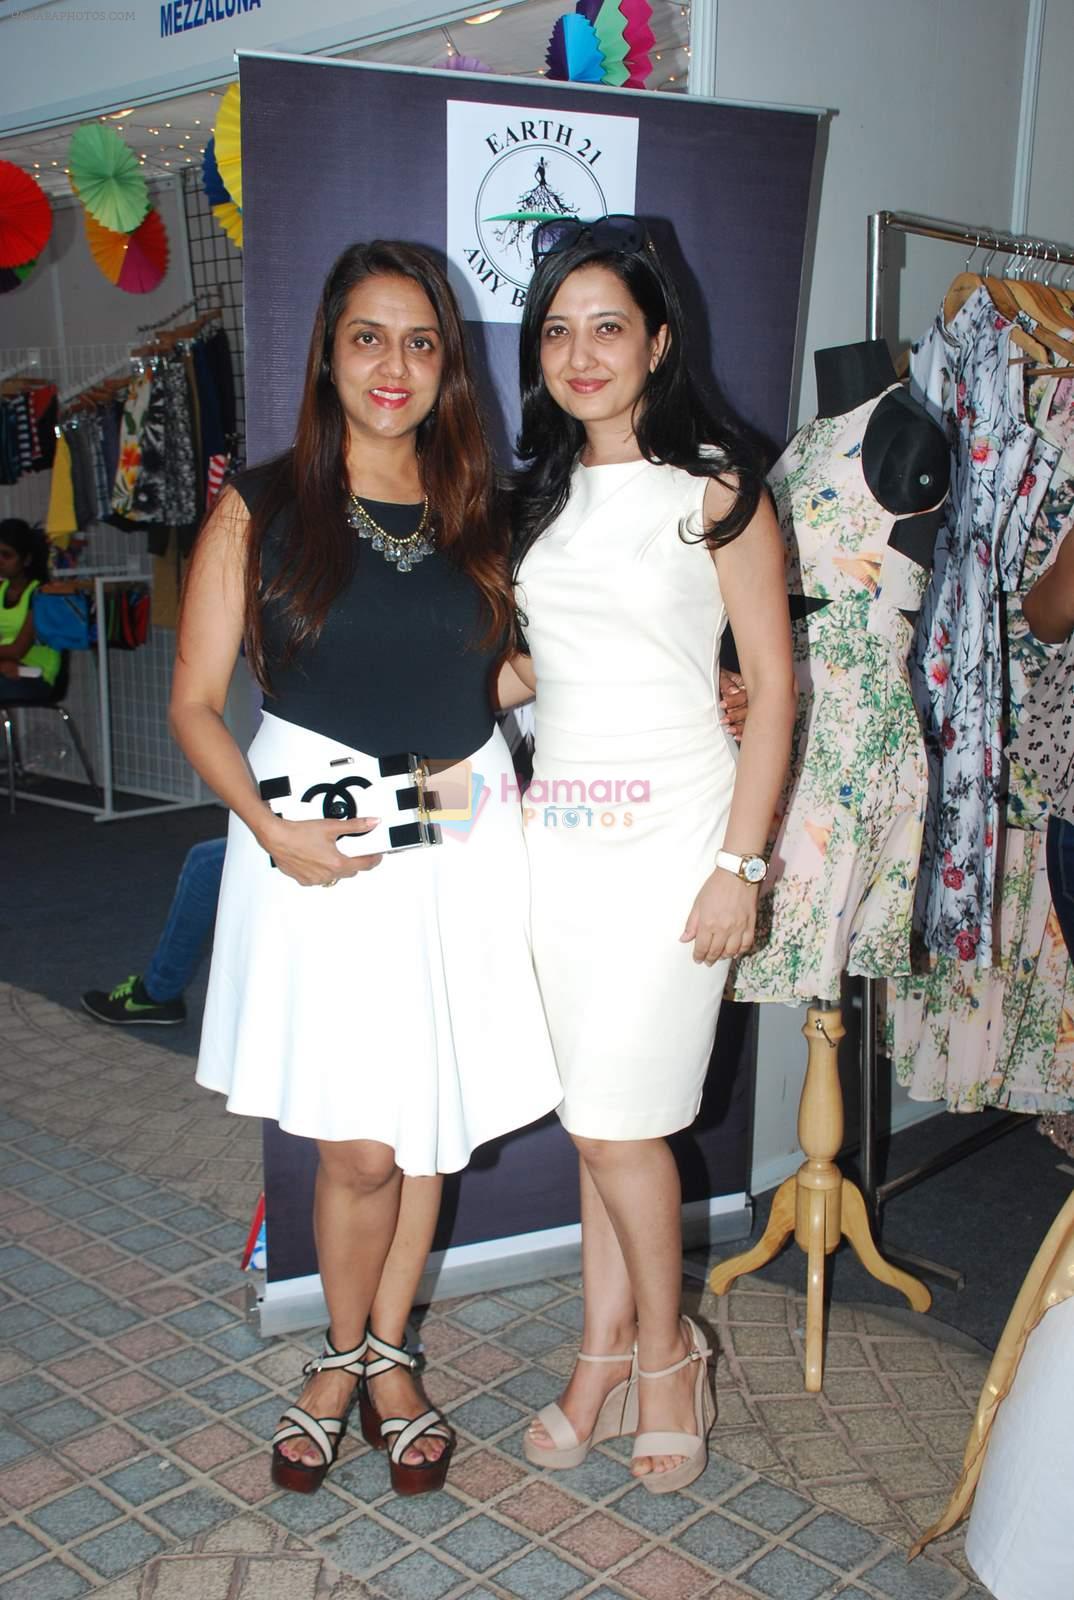 Amy Billimoria's collection at Beach Princess on 5th April 2015